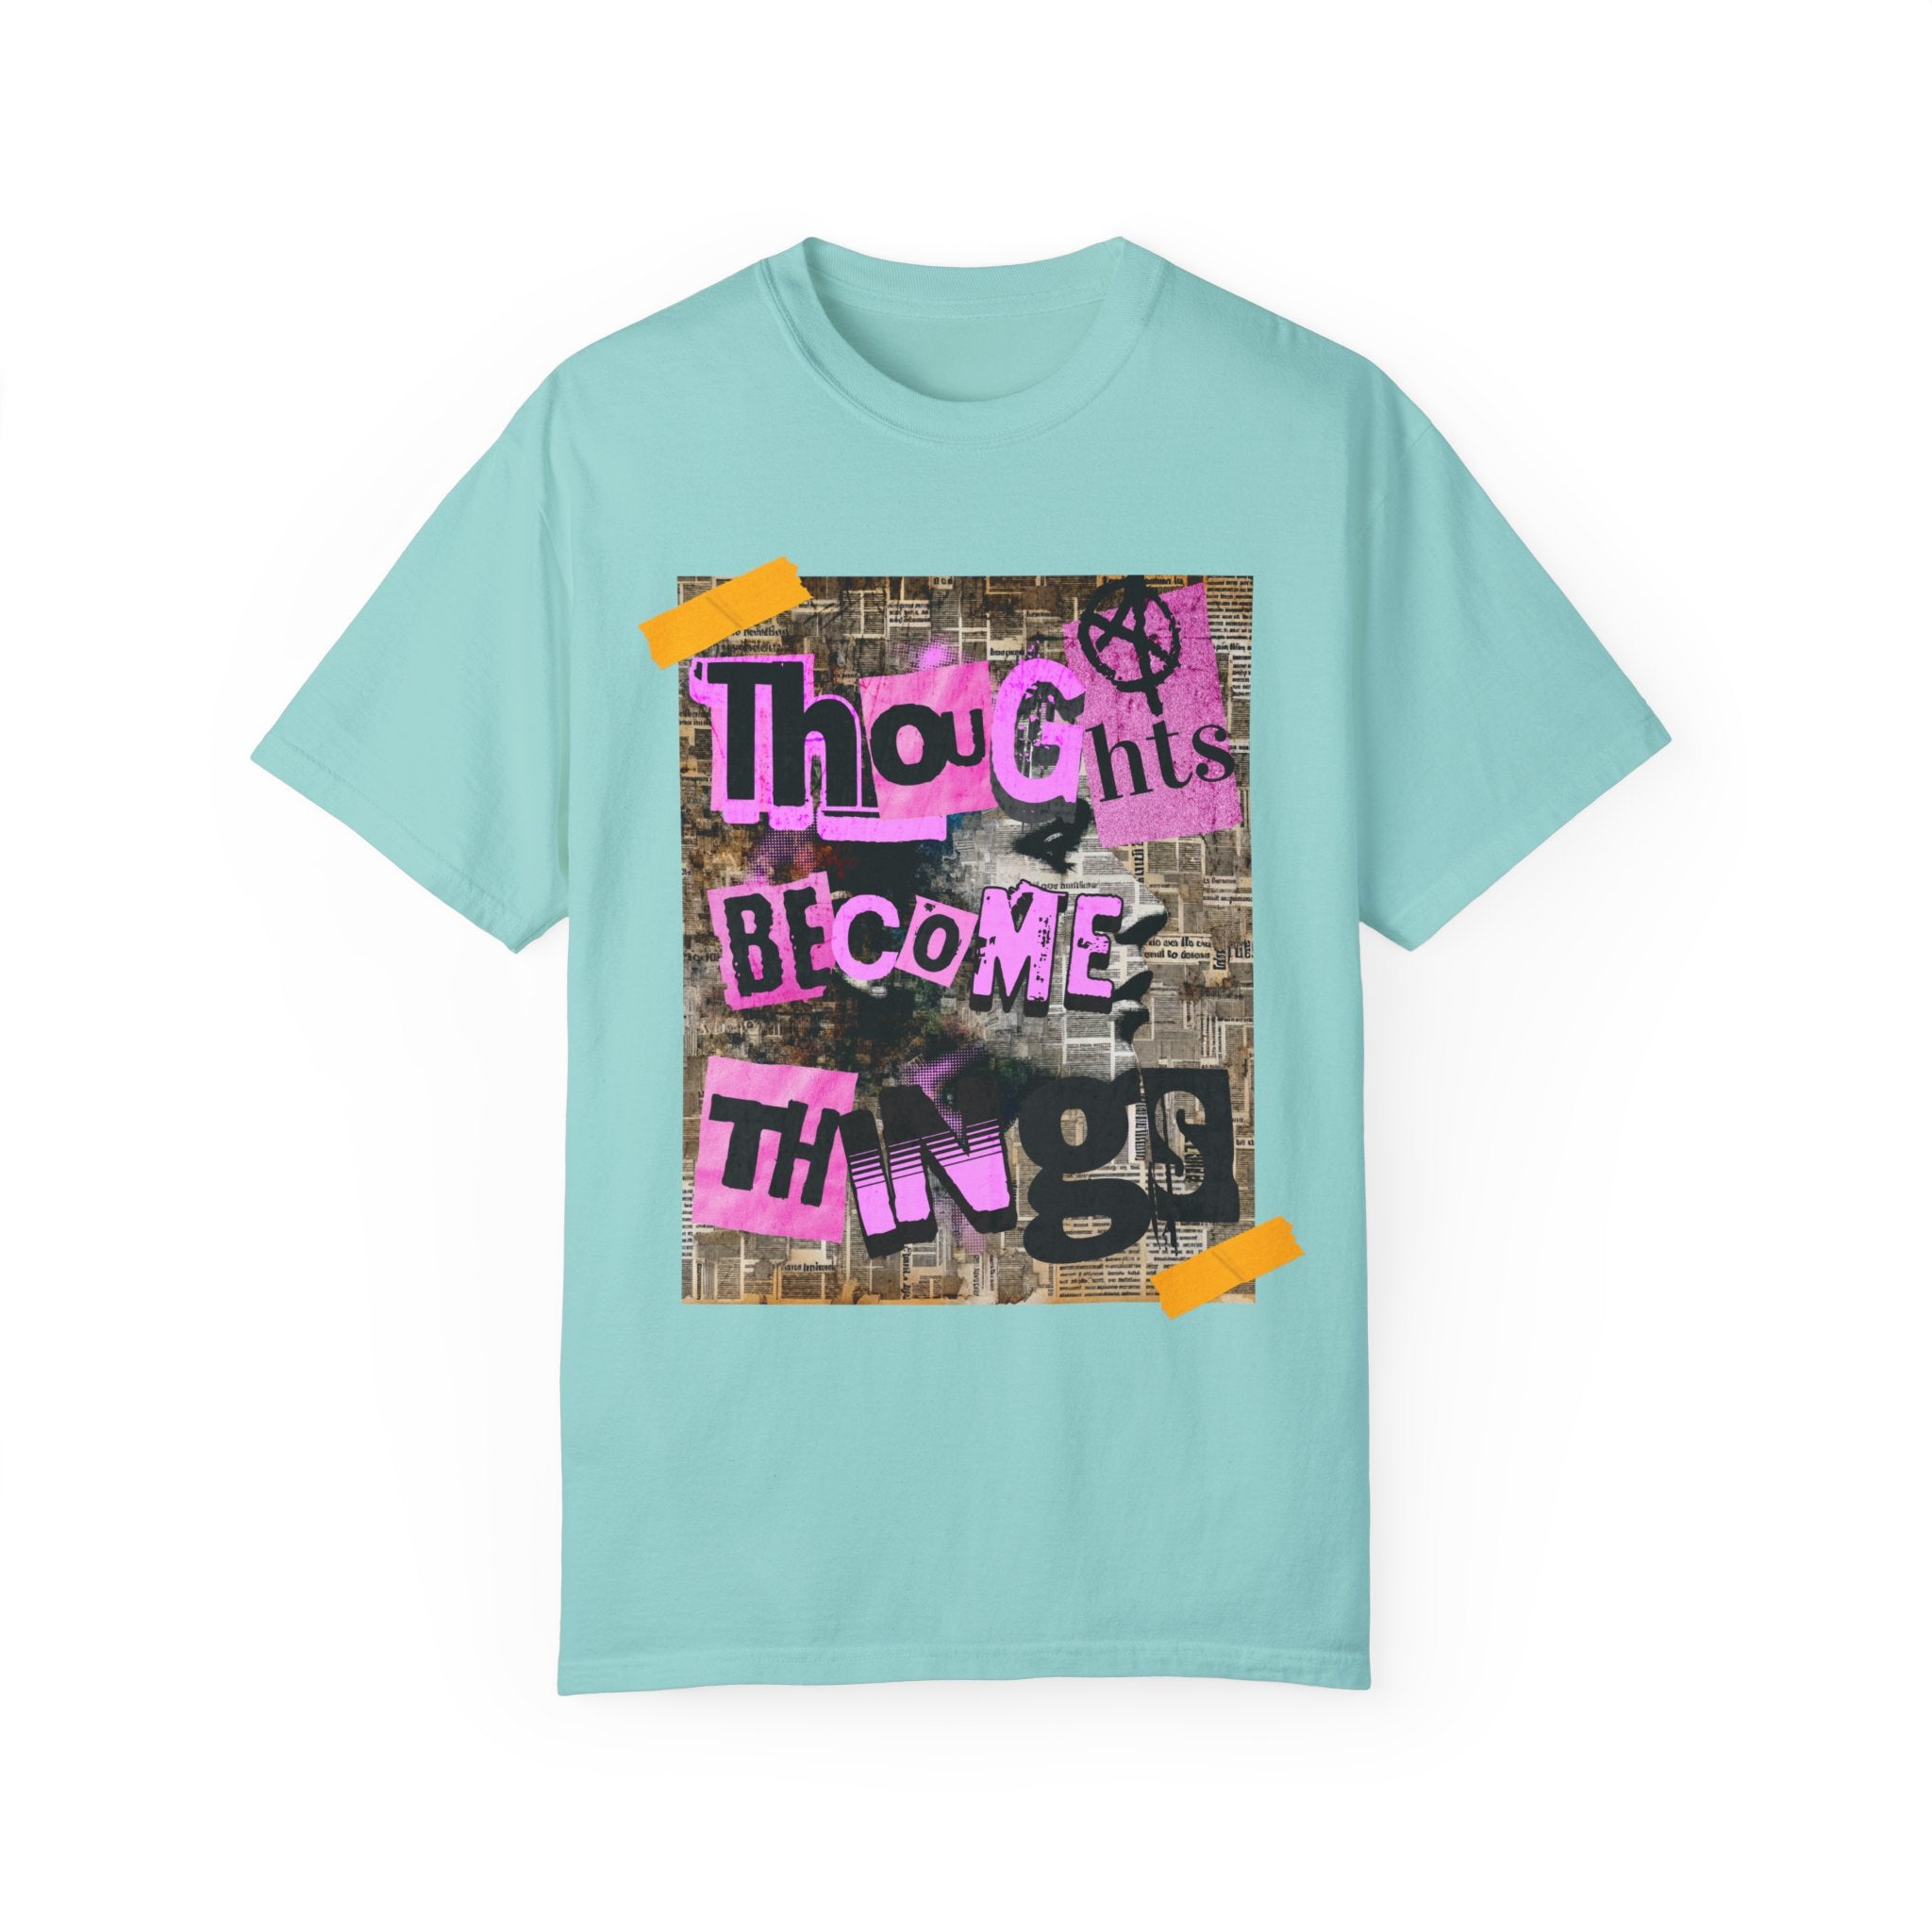 GOLDxTEAL exclusive Thoughts Become Things Graphic T-shirt.